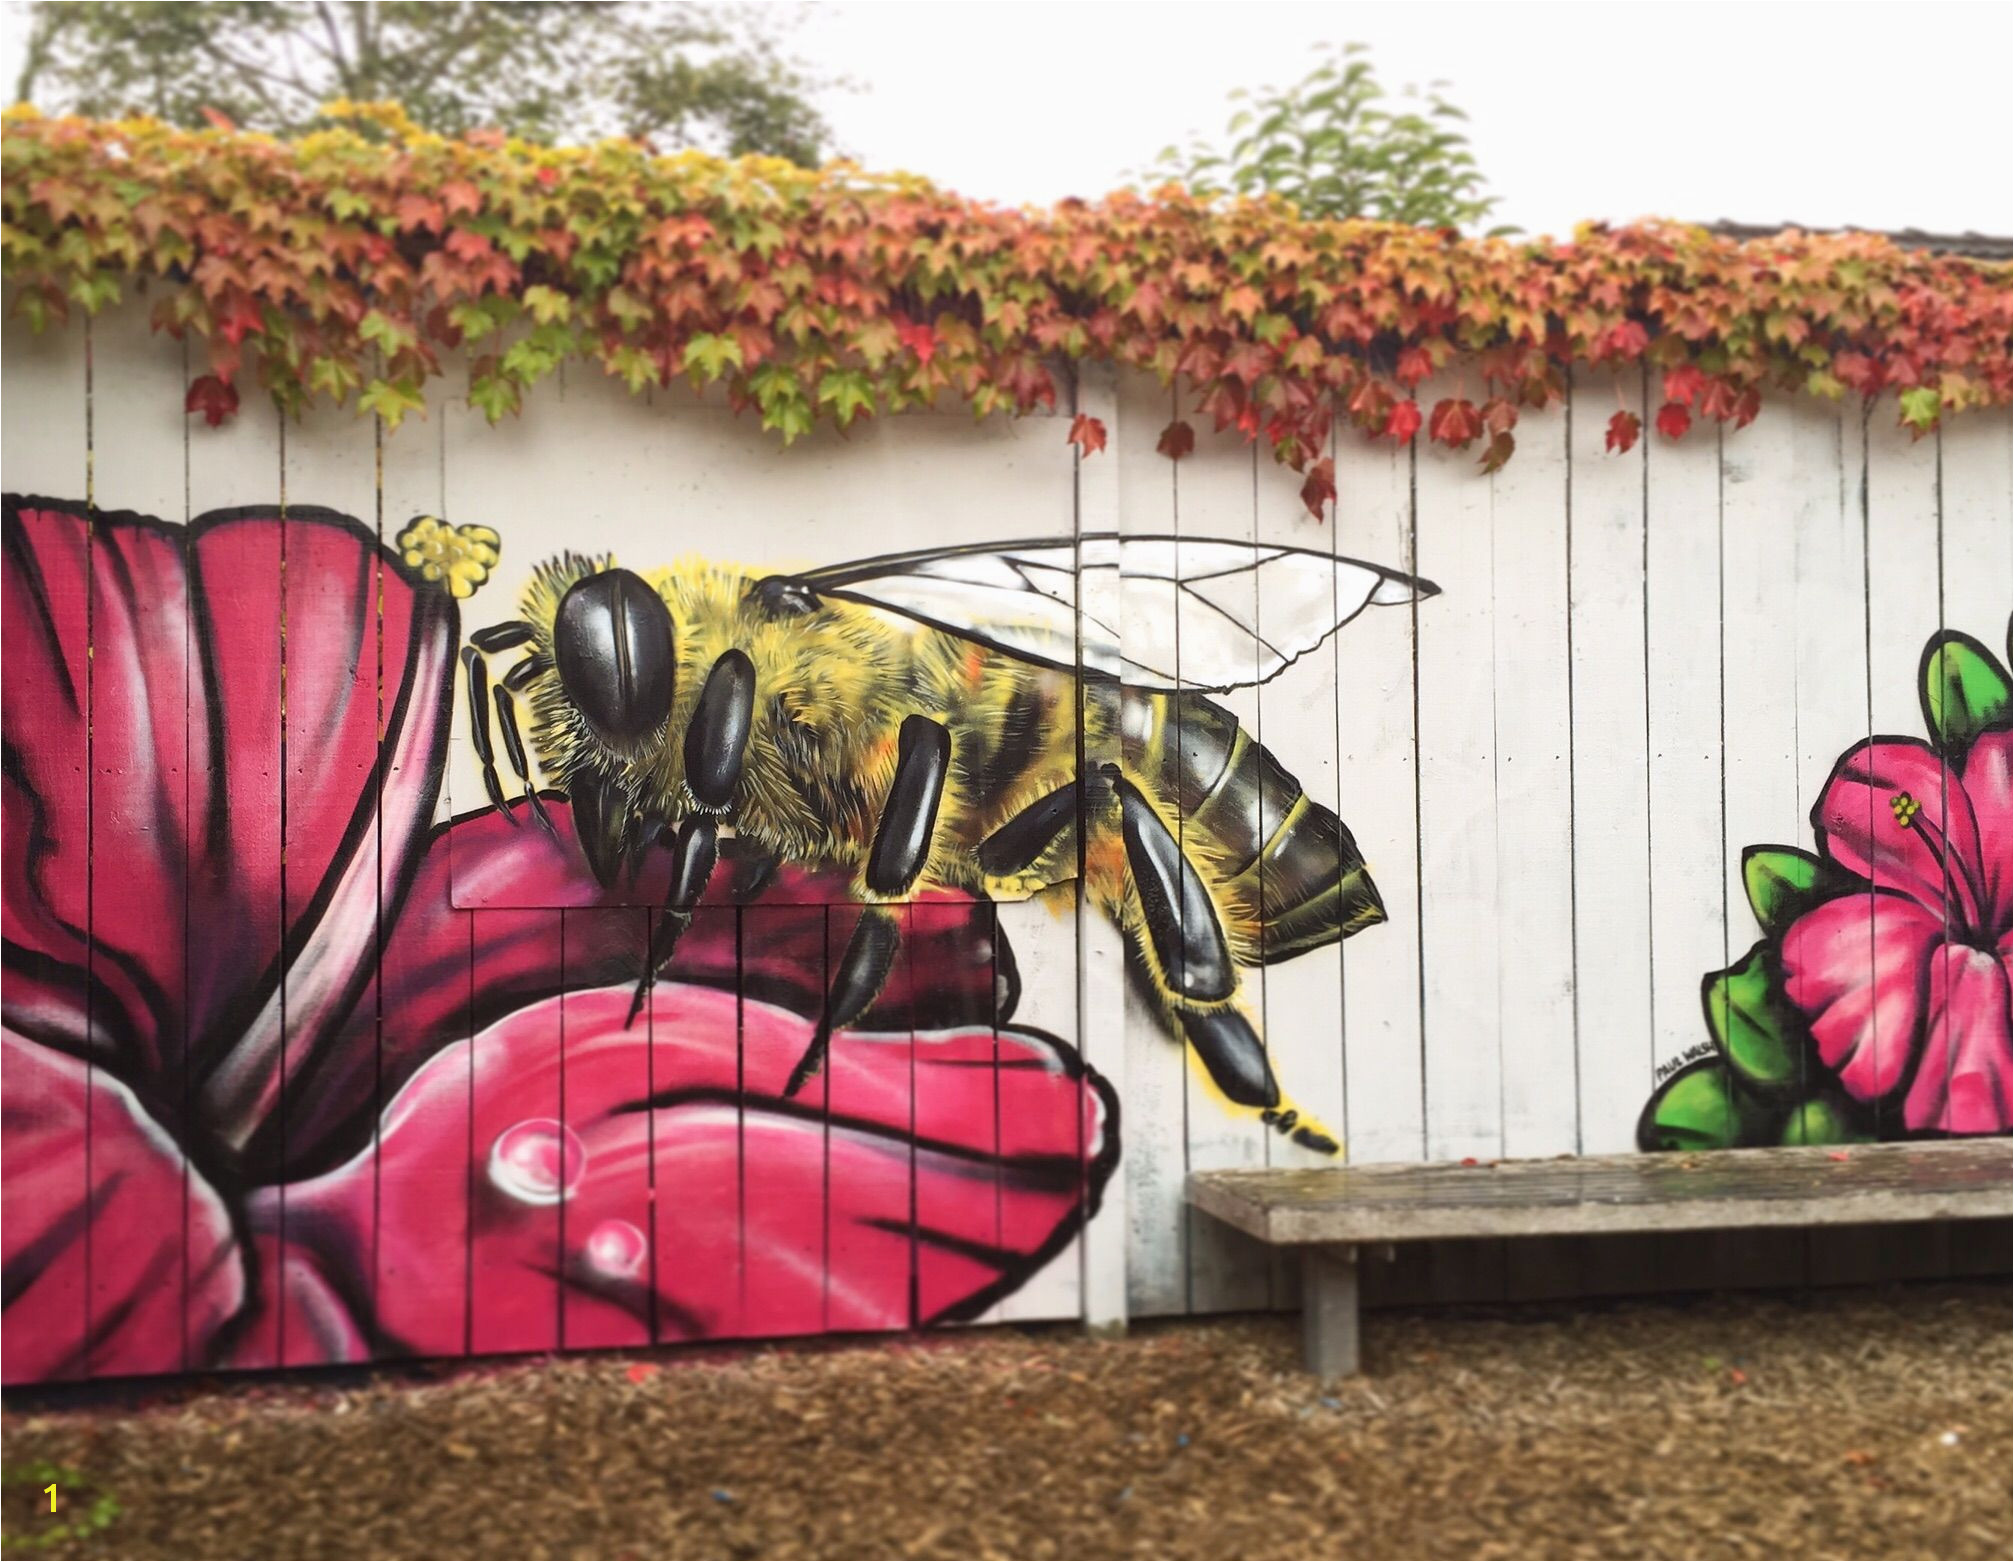 Outdoor Mural Paint I Spent My Sunday Morning Painting A Bee On the Fence Of A Local